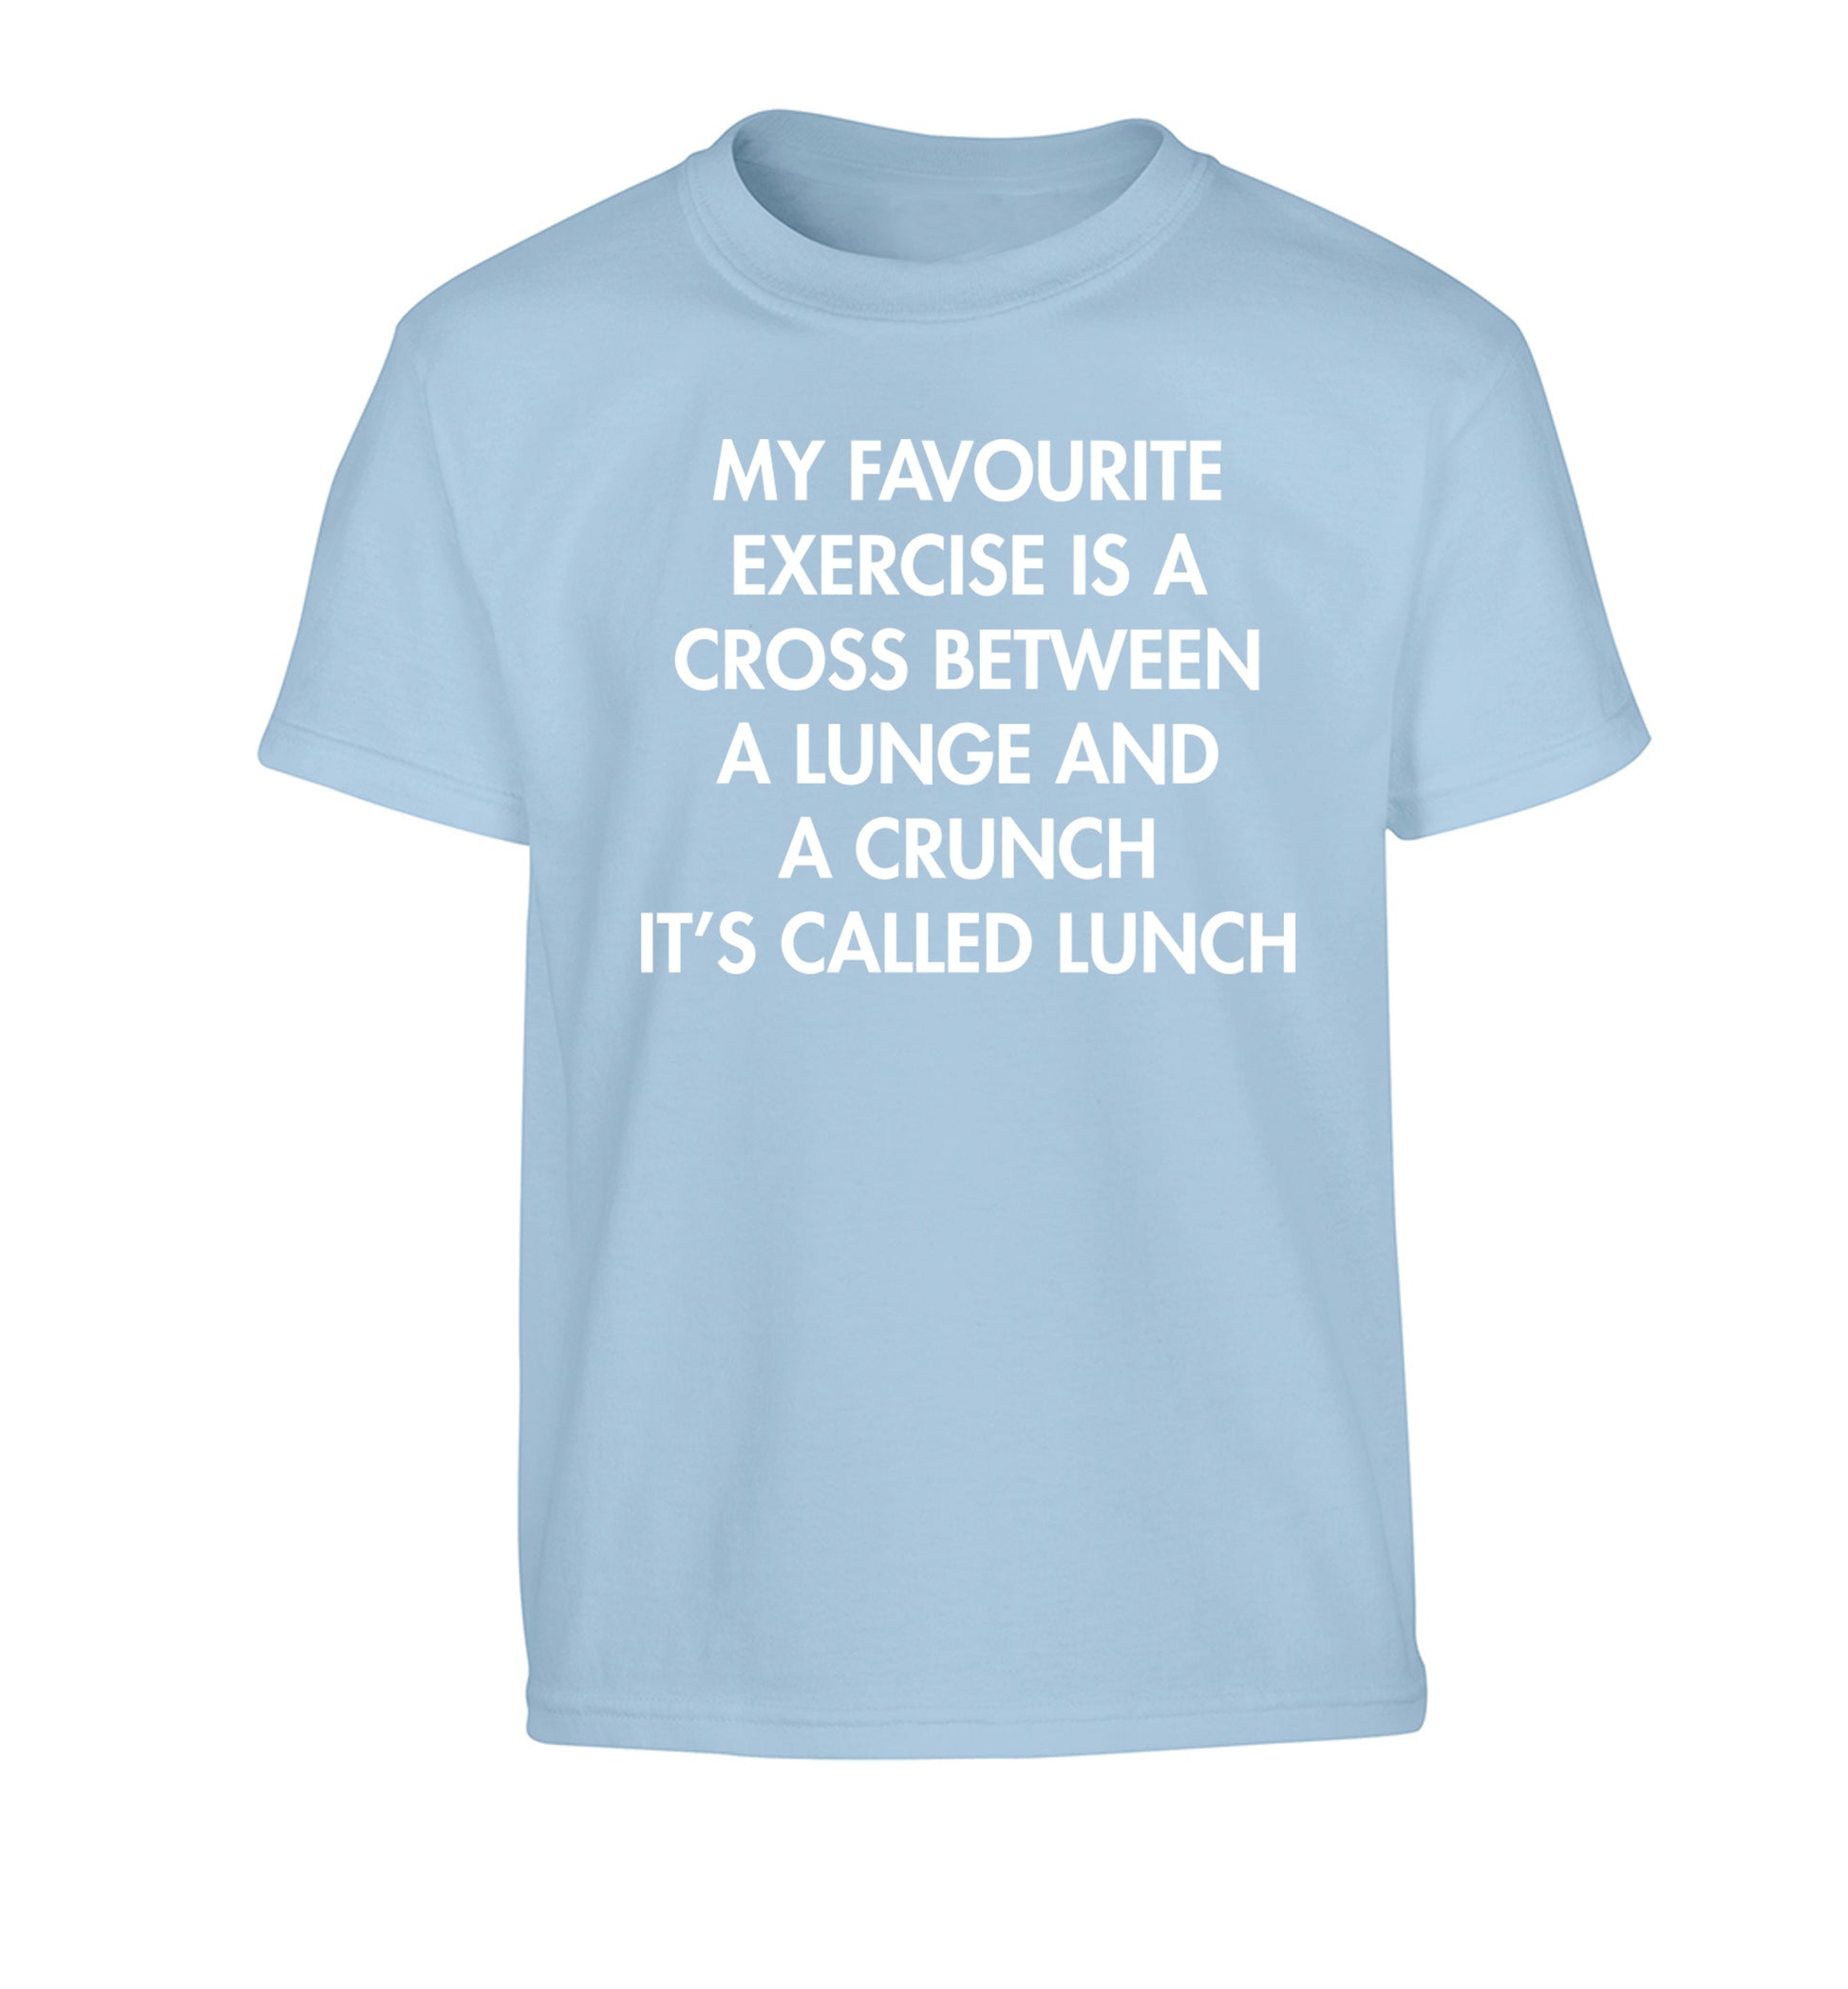 My favourite exercise is a cross between a lung and a crunch it's called lunch Children's light blue Tshirt 12-14 Years